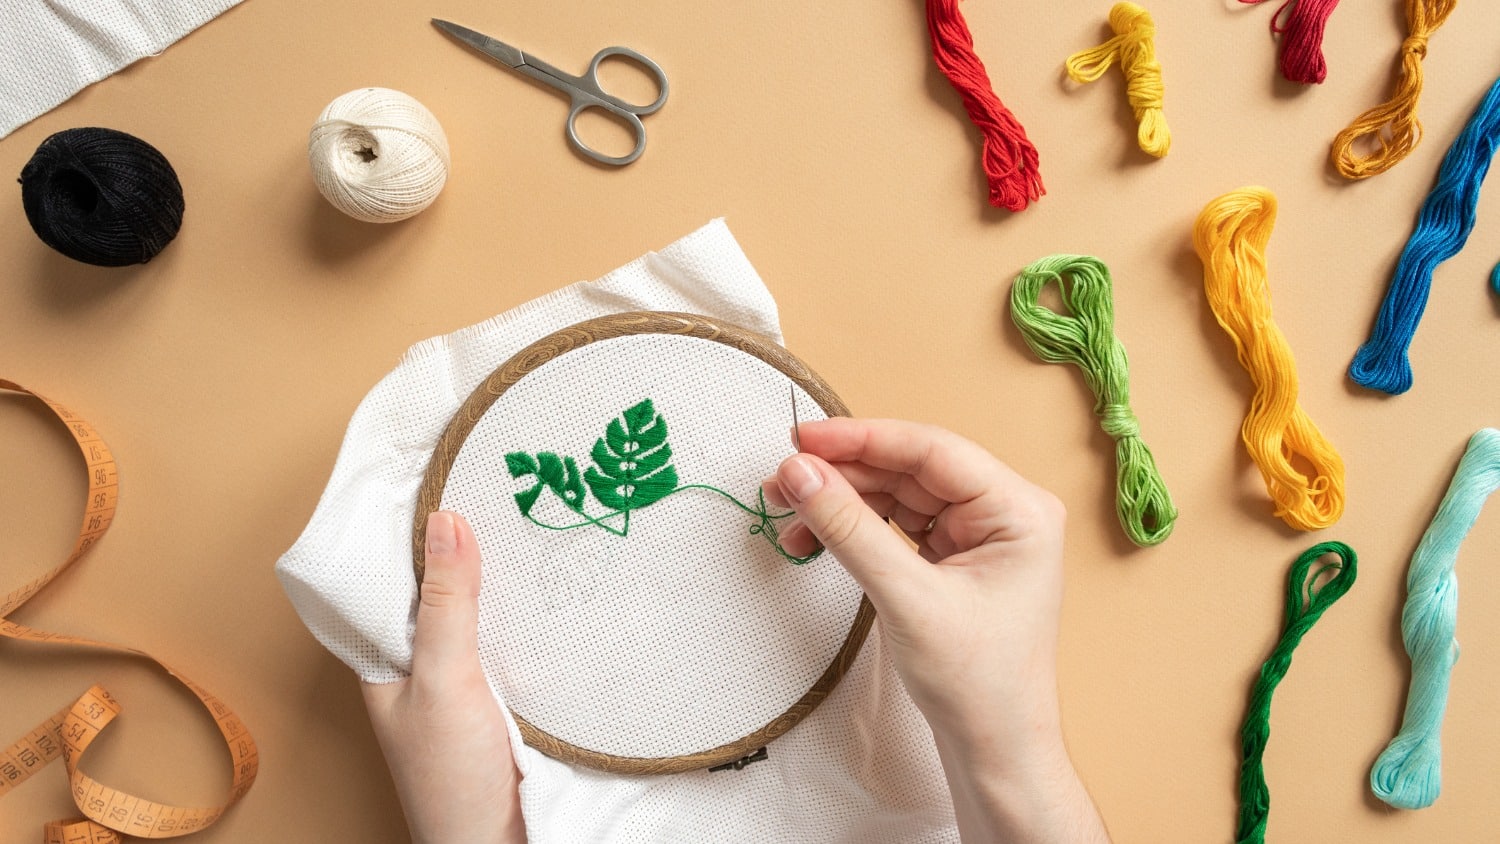 How to embroider: A complete guide to embroidery for beginners